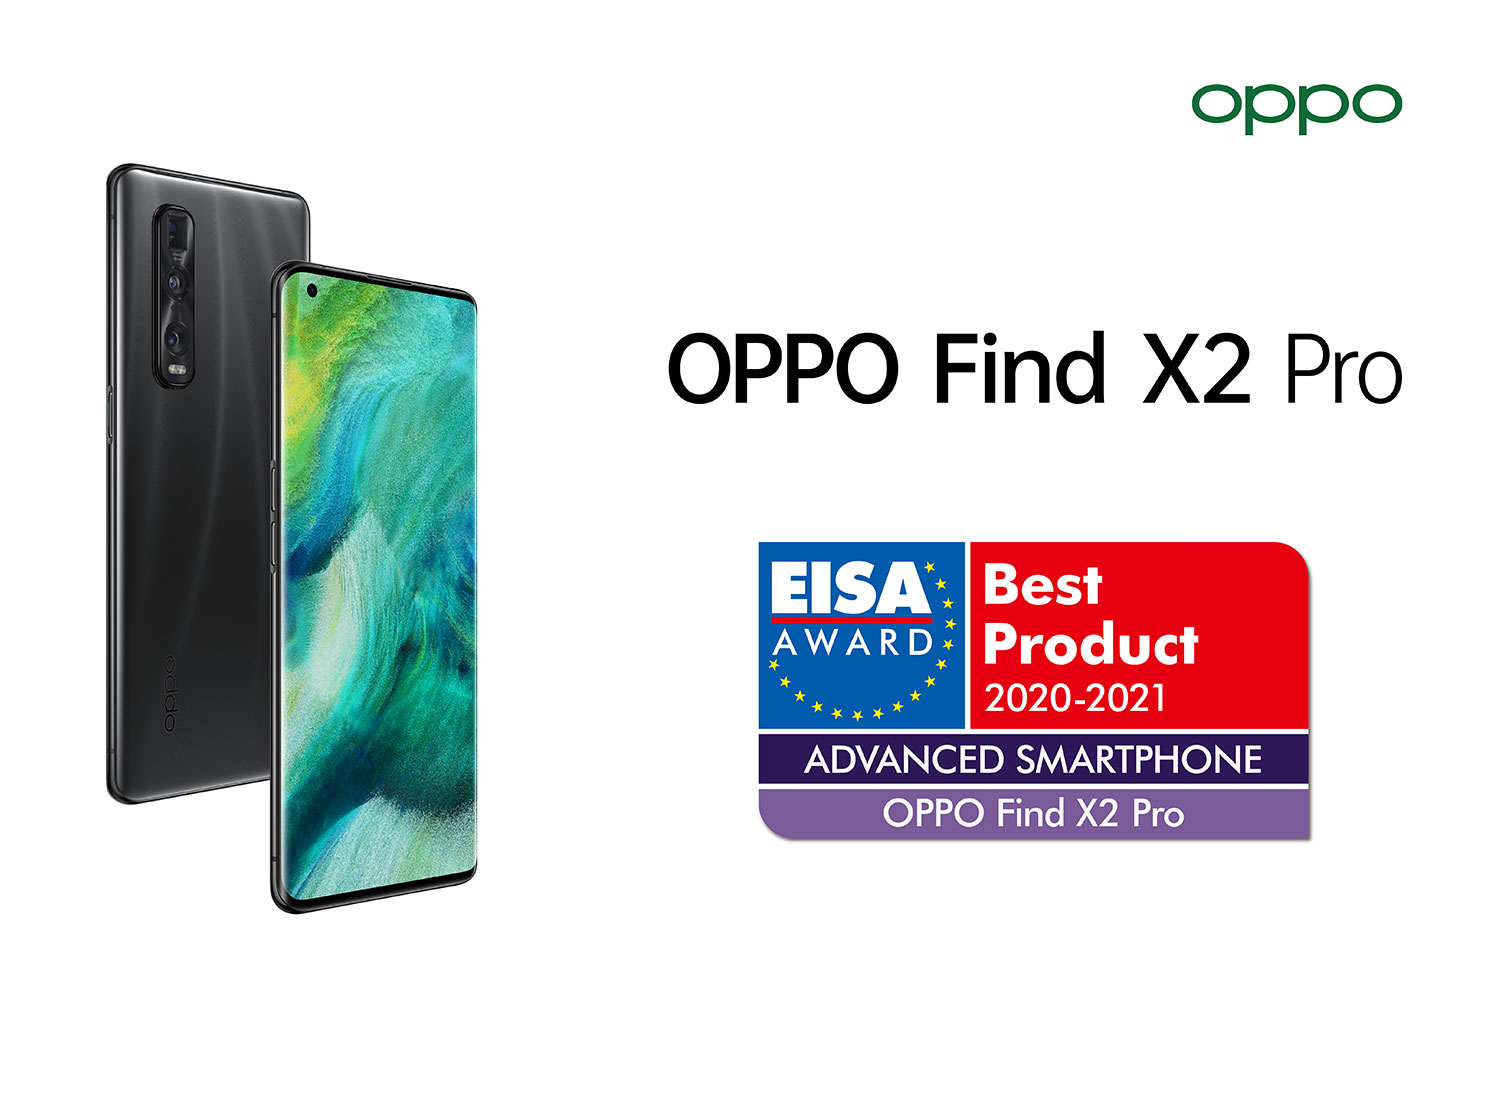 OPPO Wins EISA ADVANCED SMARTPHONE 2020-2021 Award With OPPO Find X2 Pro